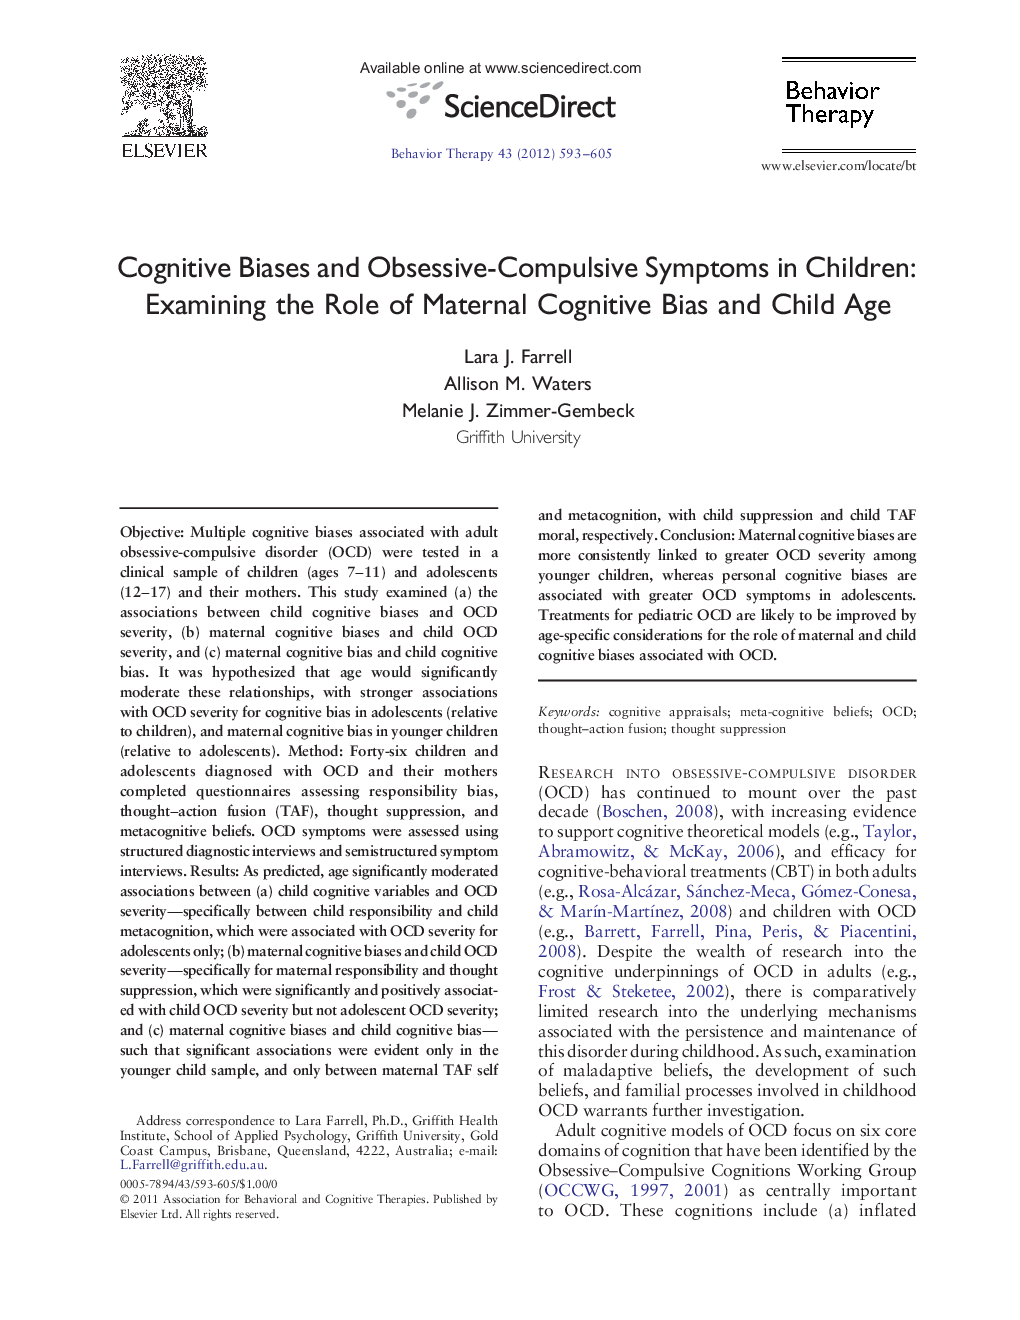 Cognitive Biases and Obsessive-Compulsive Symptoms in Children: Examining the Role of Maternal Cognitive Bias and Child Age